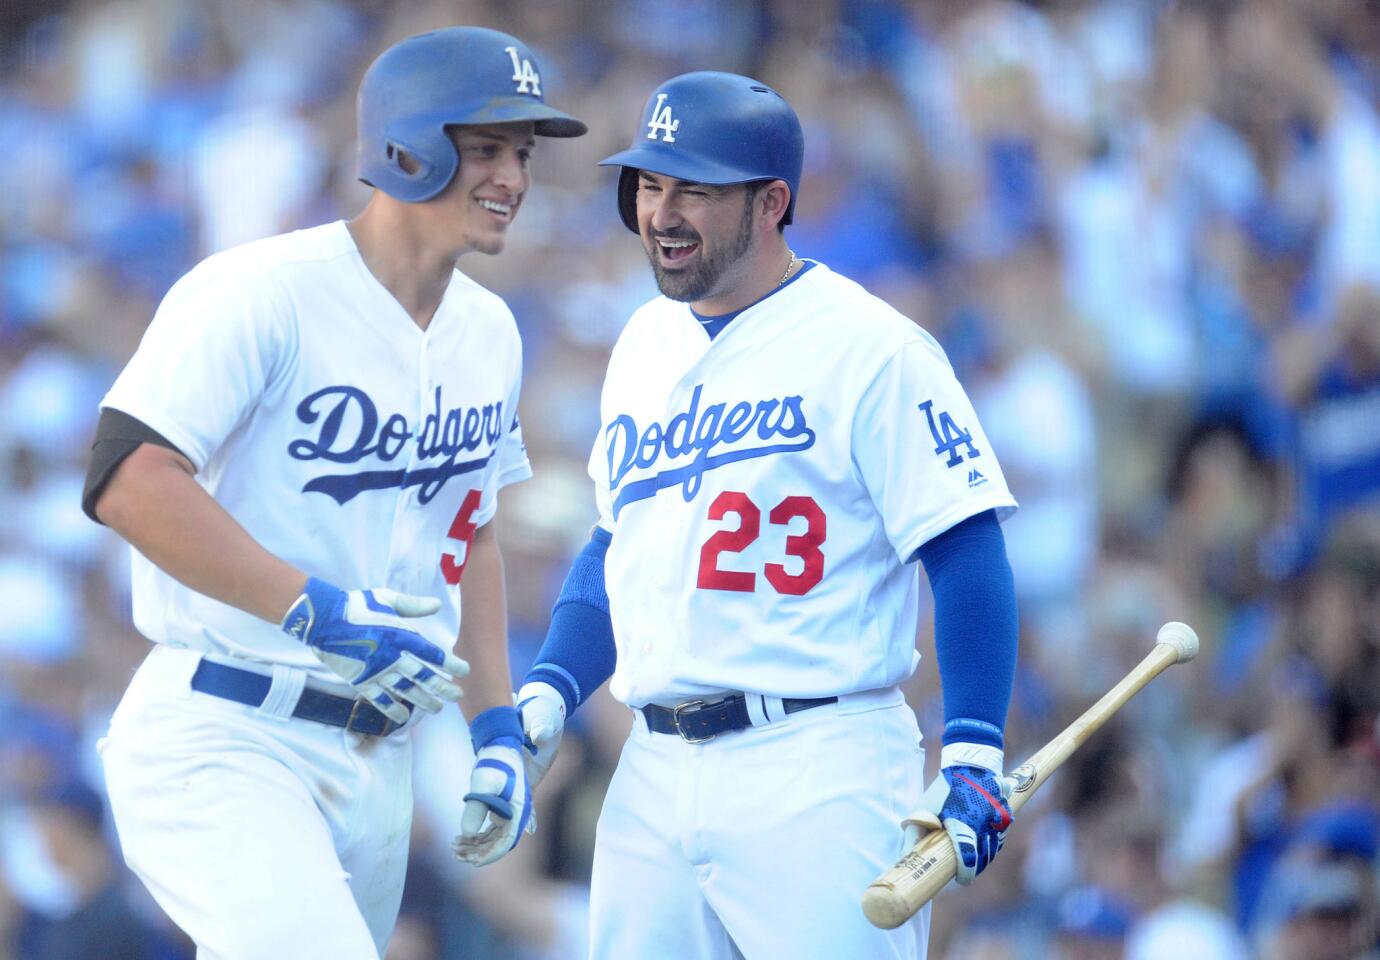 September 25, 2016; Los Angeles, CA, USA; Los Angeles Dodgers shortstop Corey Seager (5) is greeted by first baseman Adrian Gonzalez (23) after he hits a solo home run in the ninth inning against the Colorado Rockies at Dodger Stadium. Mandatory Credit: Gary A. Vasquez-USA TODAY Sports ** Usable by SD ONLY **